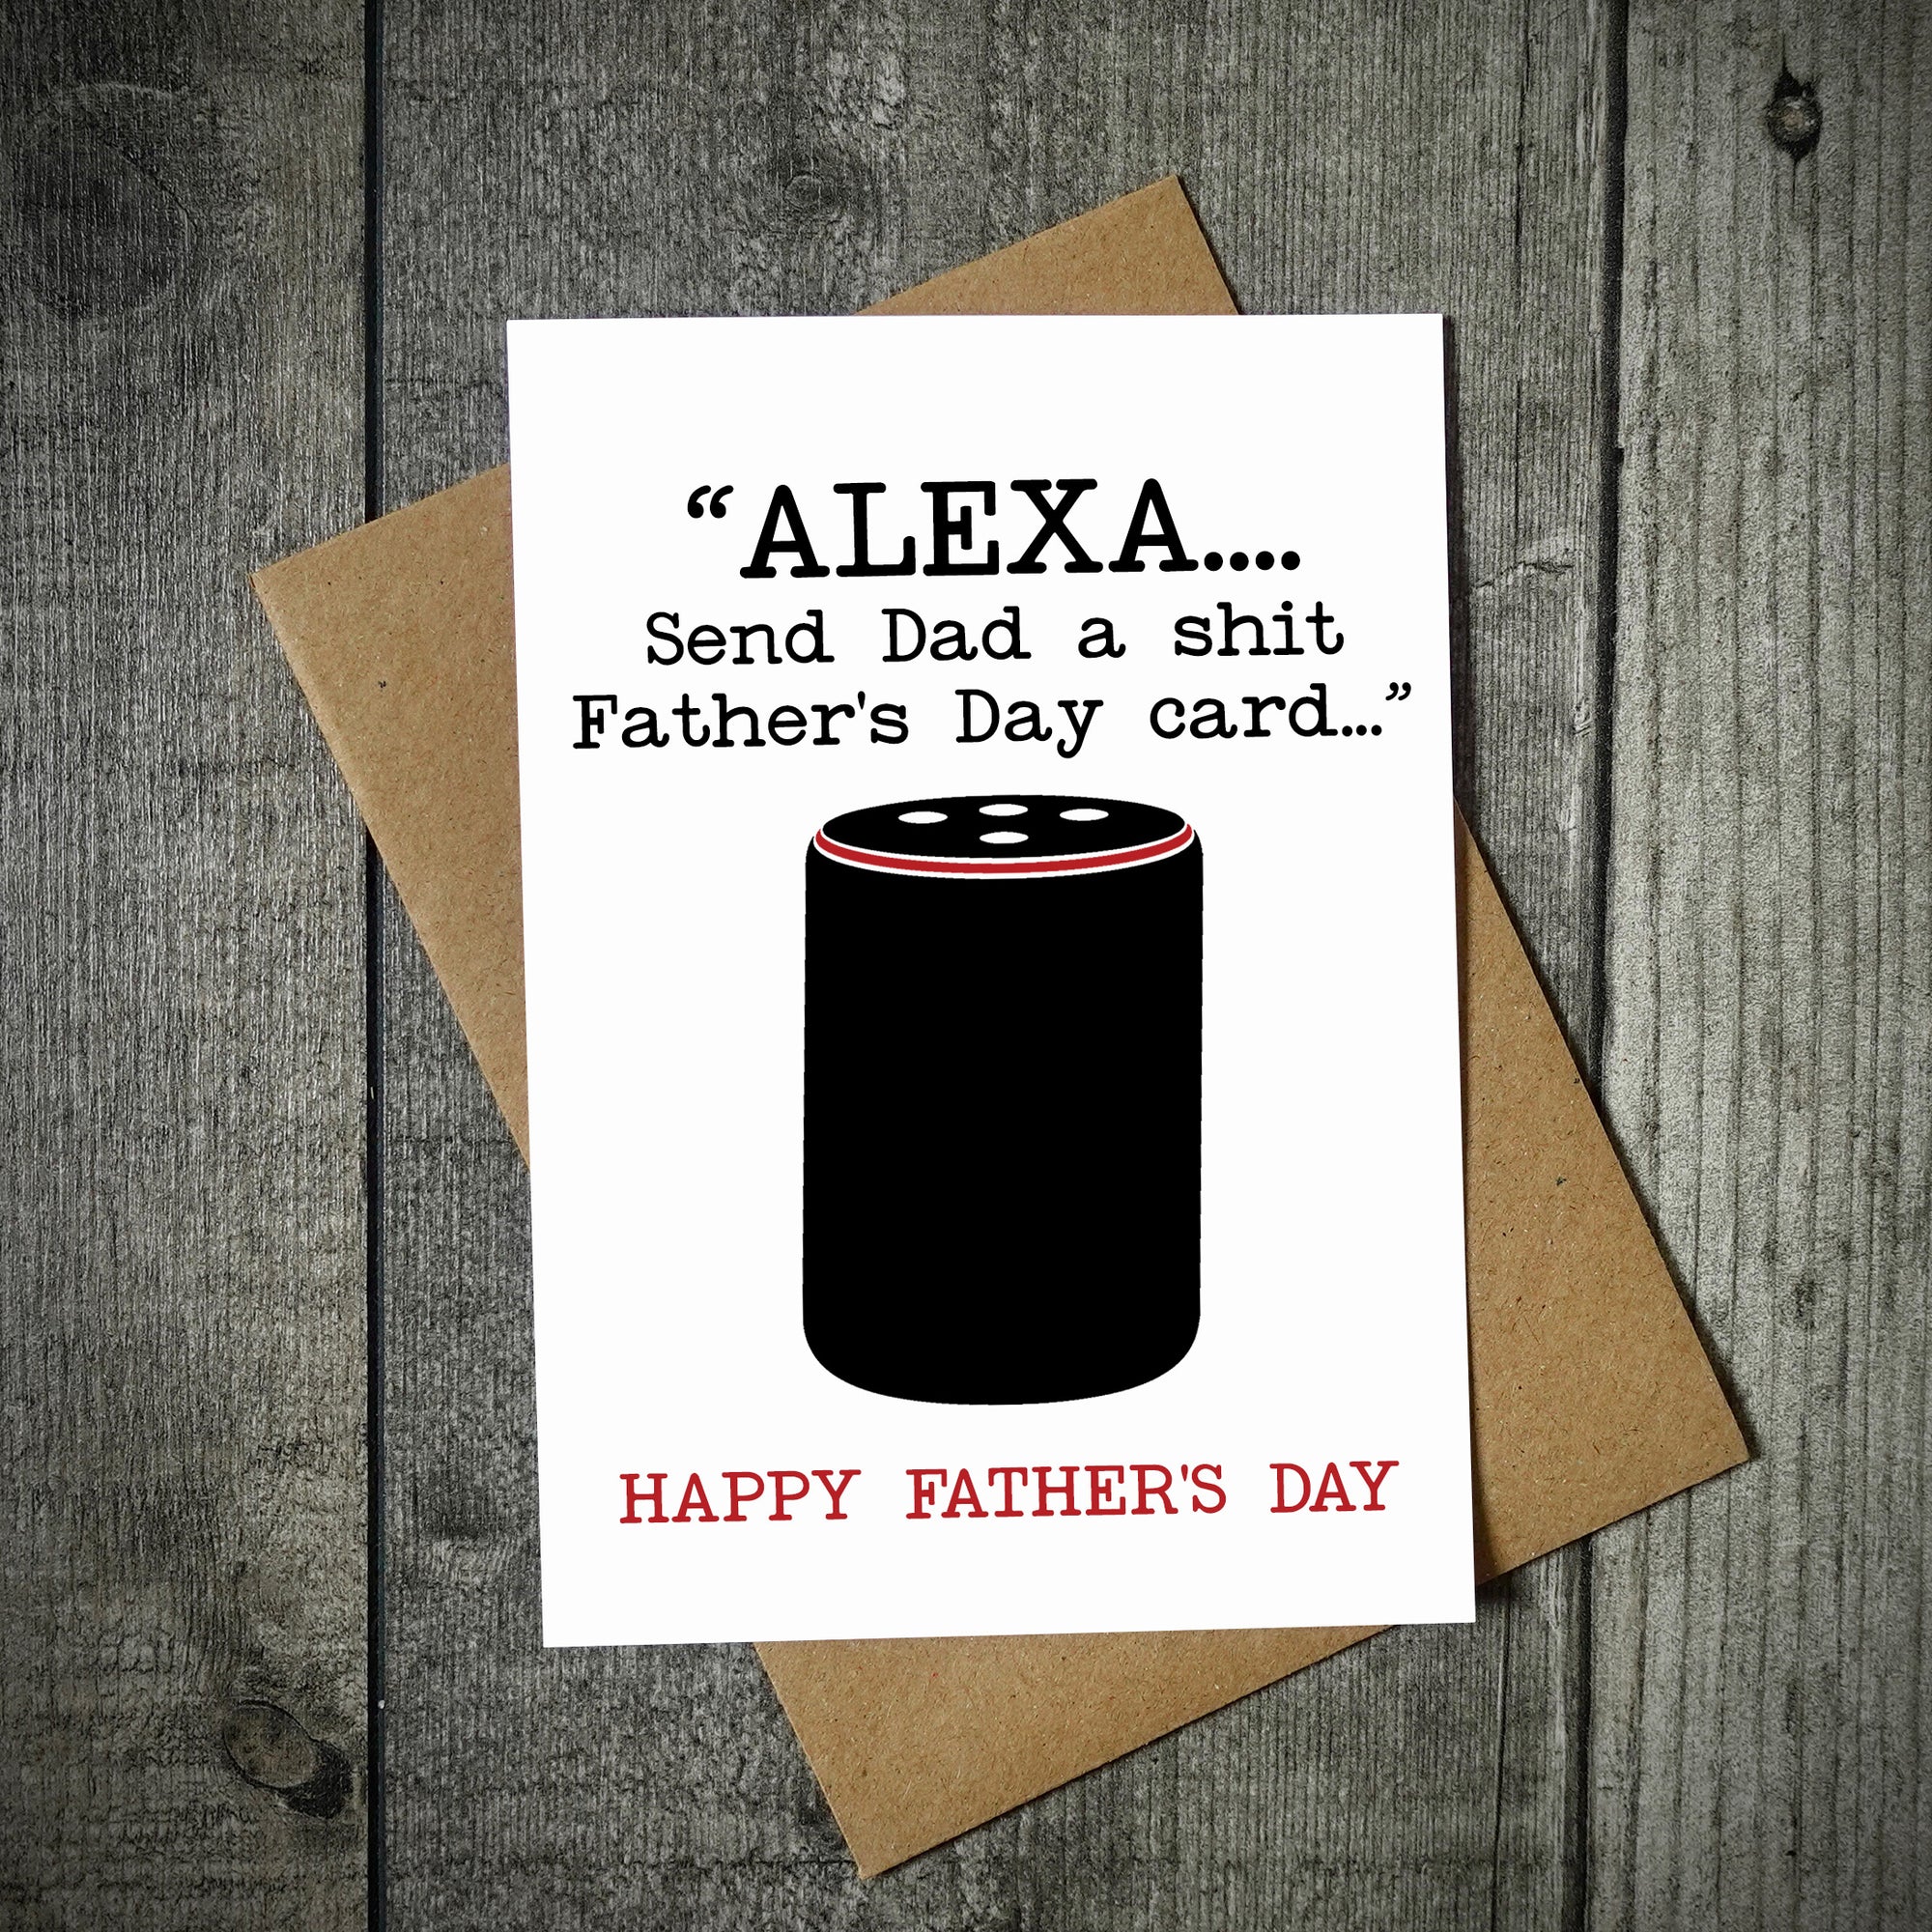 Alexa Send Dad A Shit Father's Day Card